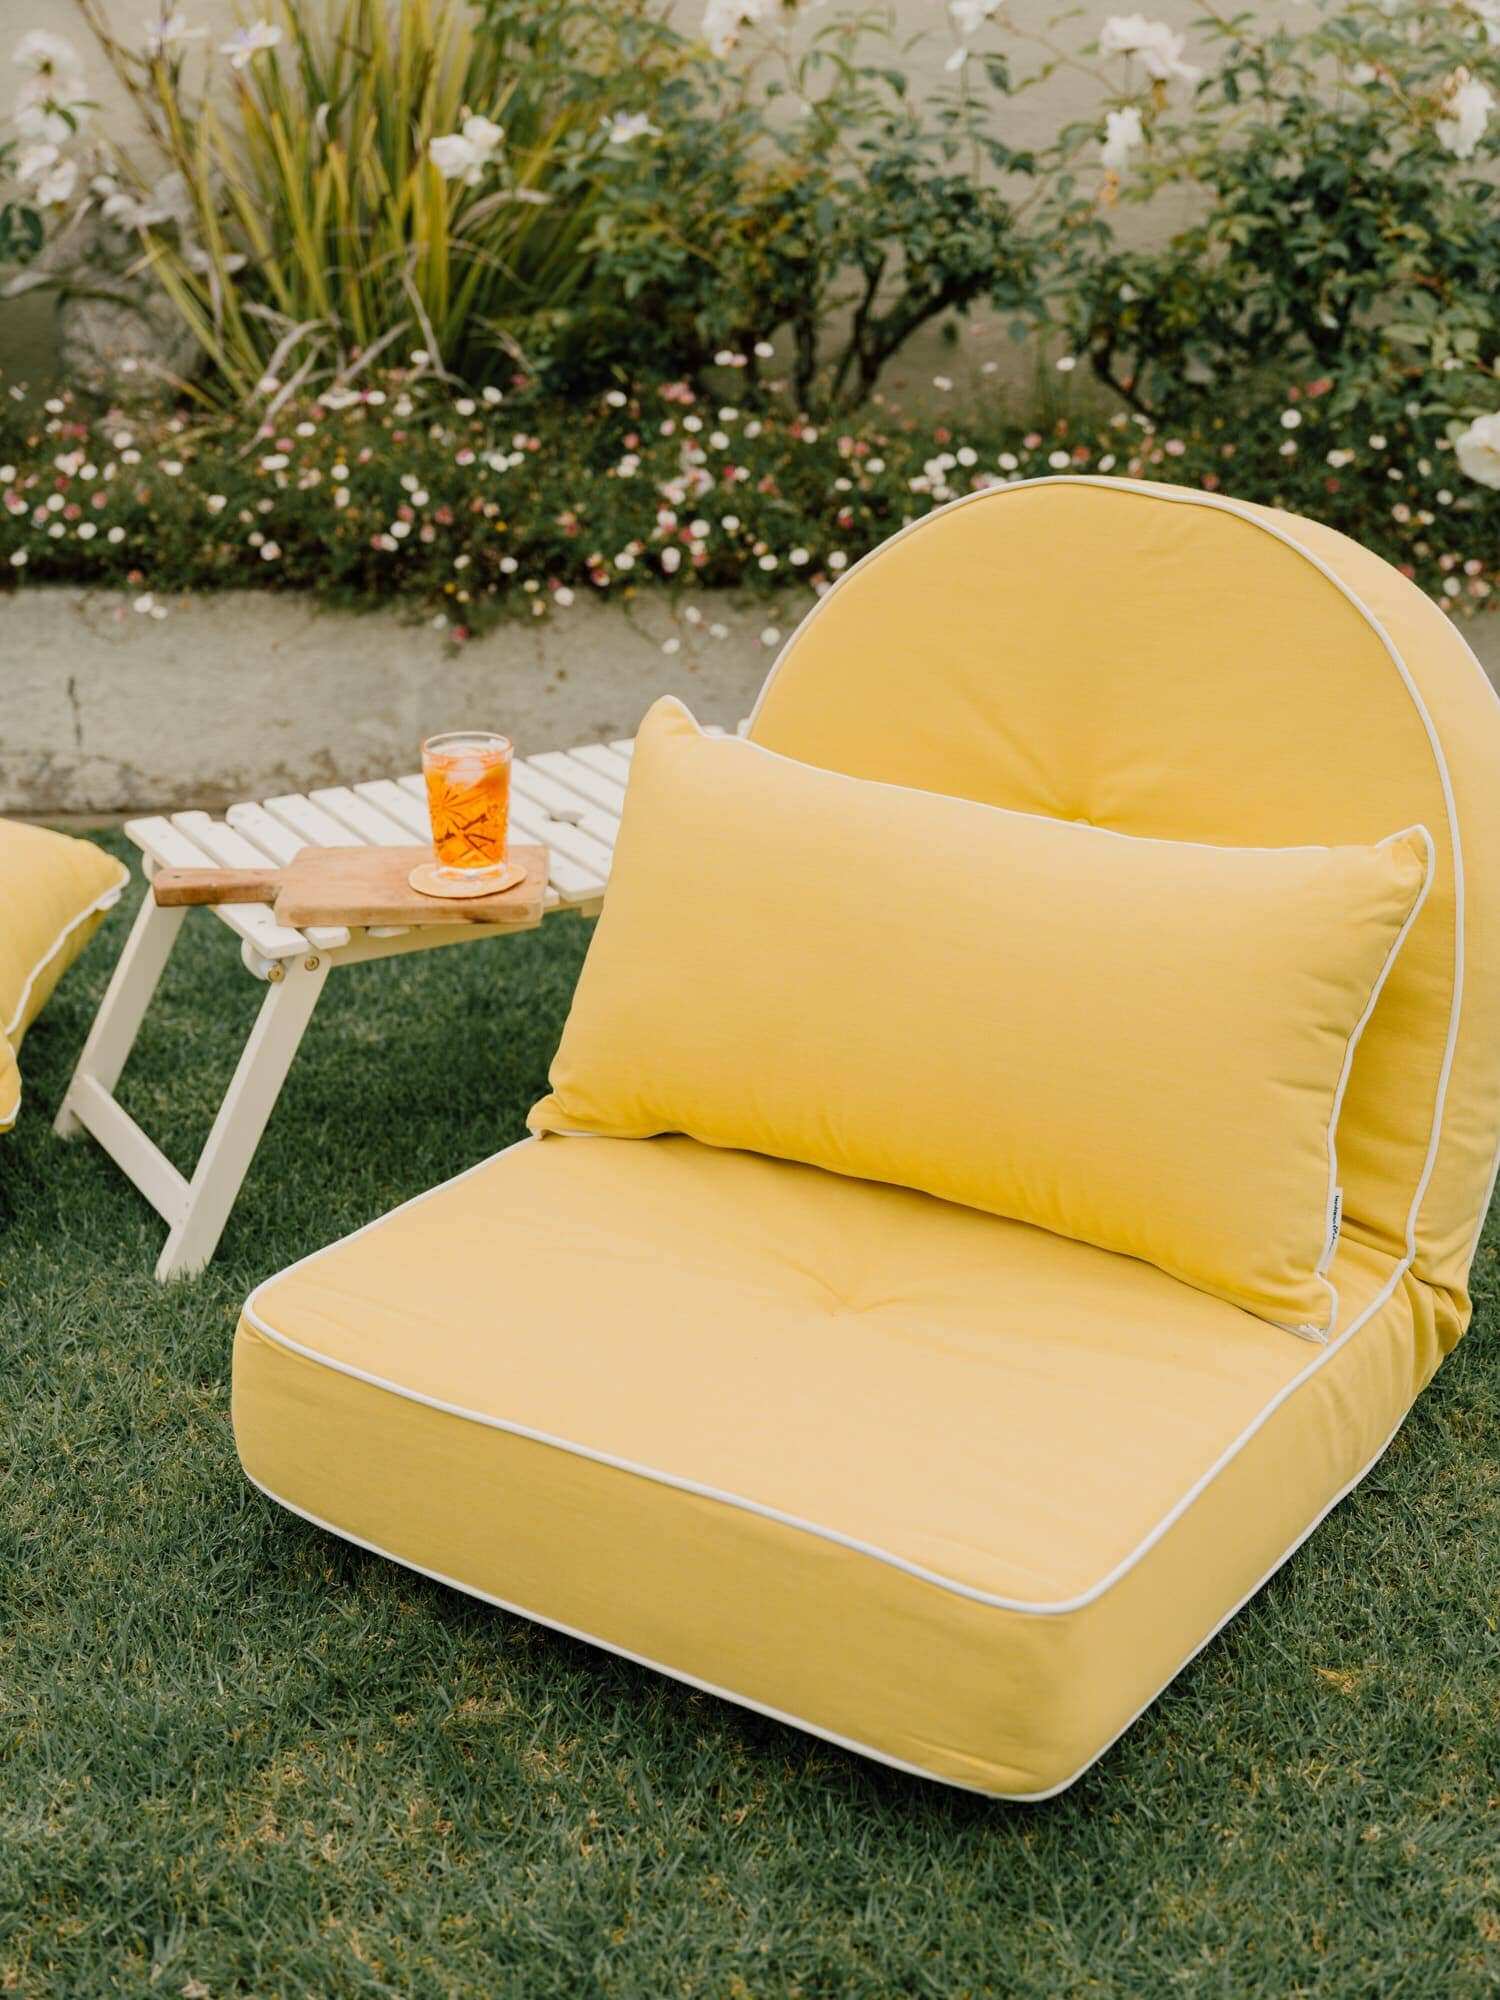 Riviera mimosa lounger in a garden setting